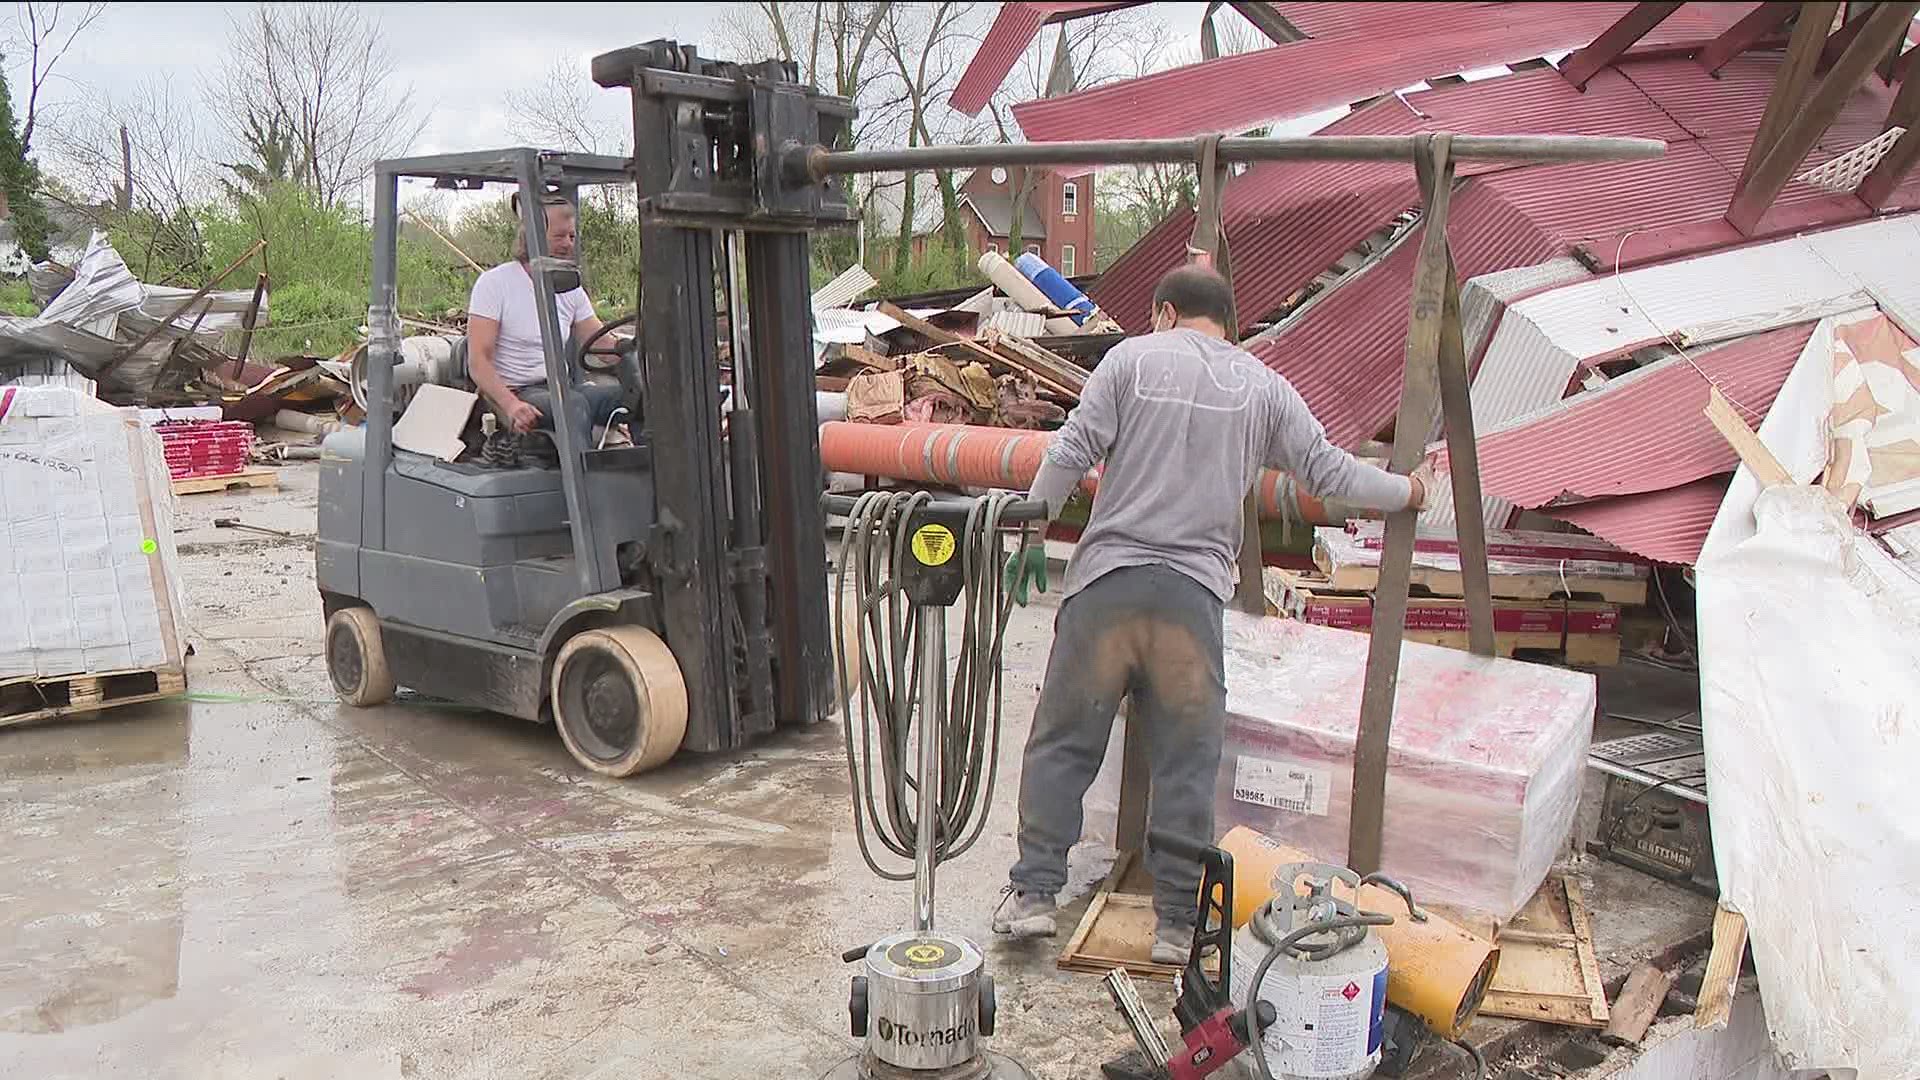 Recovery is already beginning in Coweta County as crews clear debris and groups begin collecting supplies by those who lost everything to an EF-4 tornado.